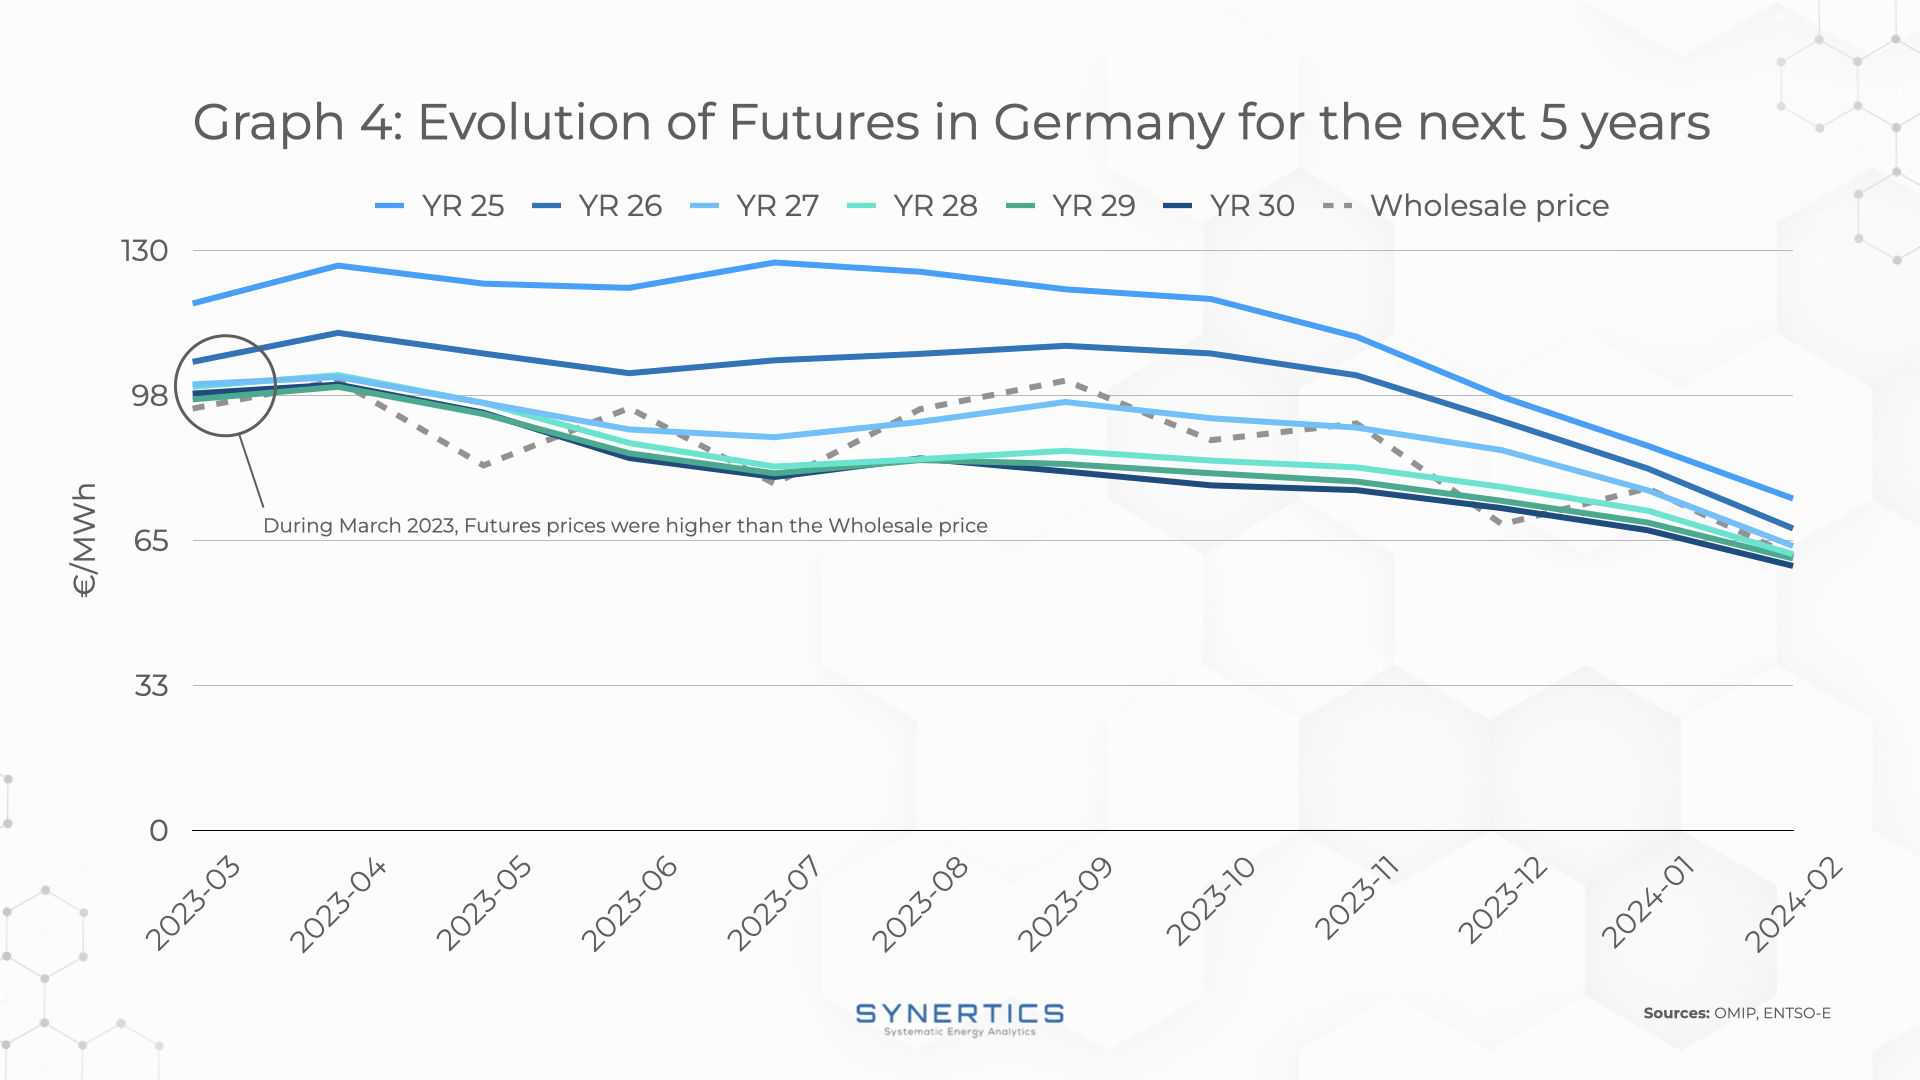 Evolution of Futures in Germany